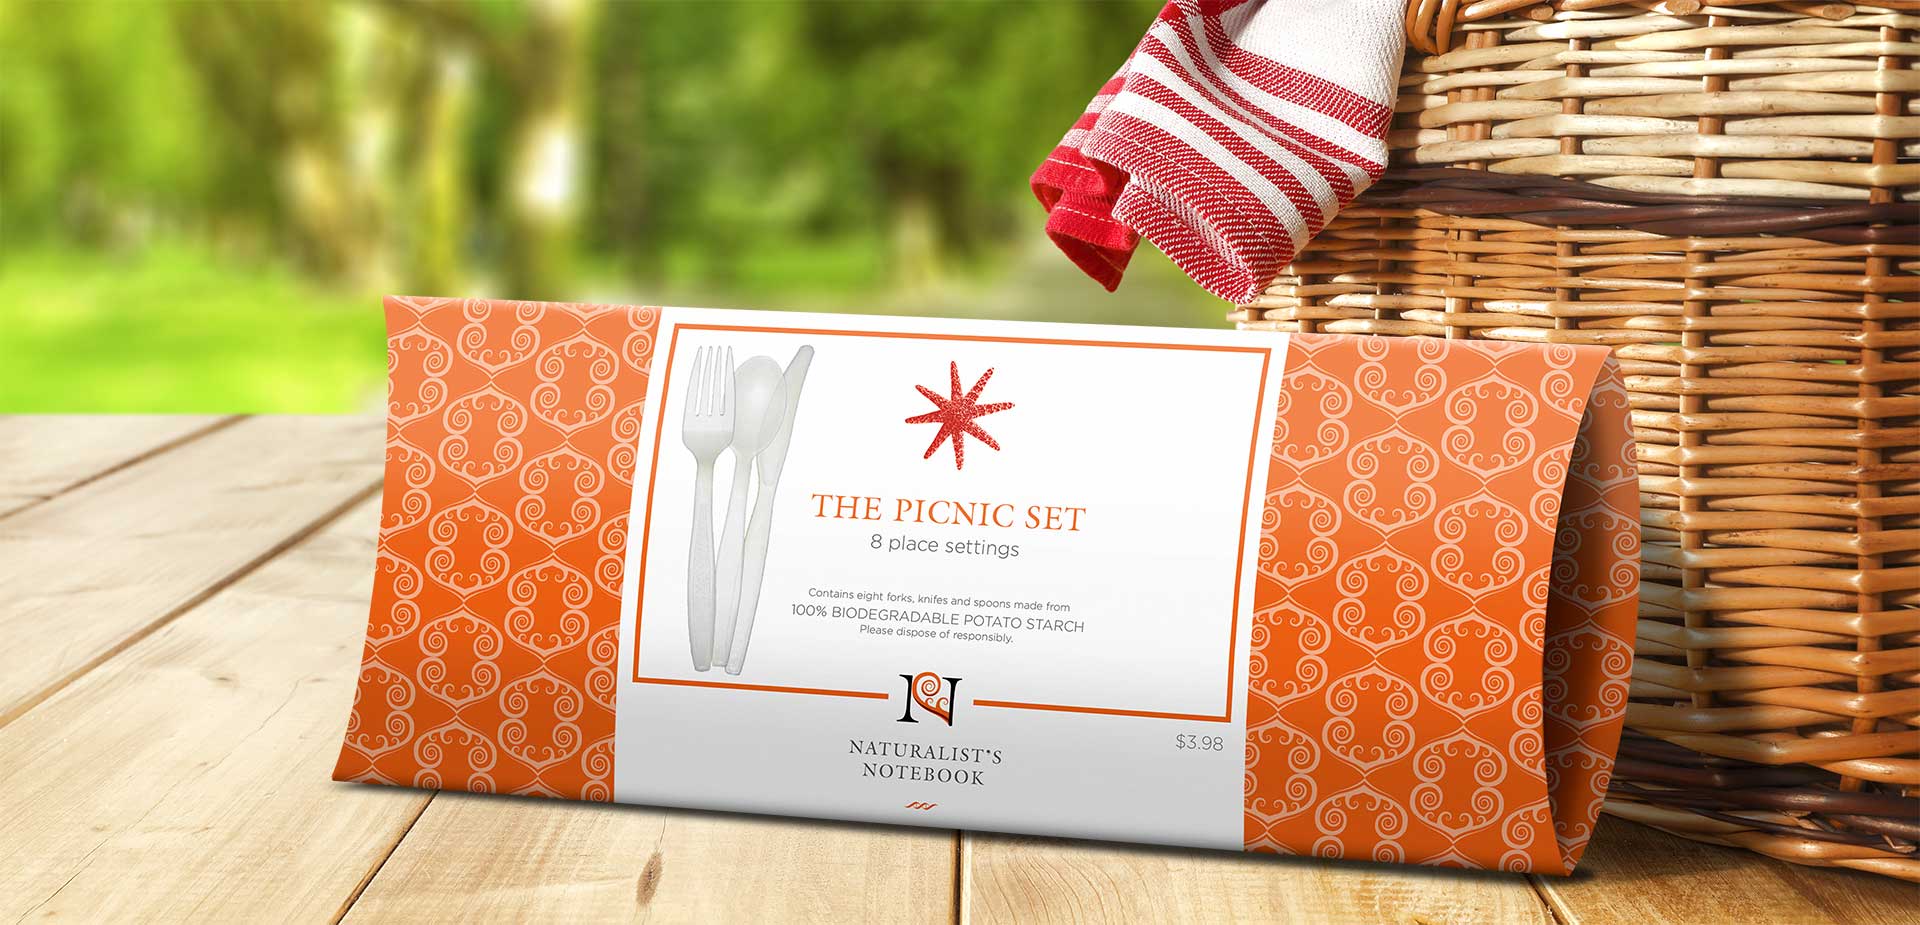 Naturalist's Notebook picnic cutlery packaging